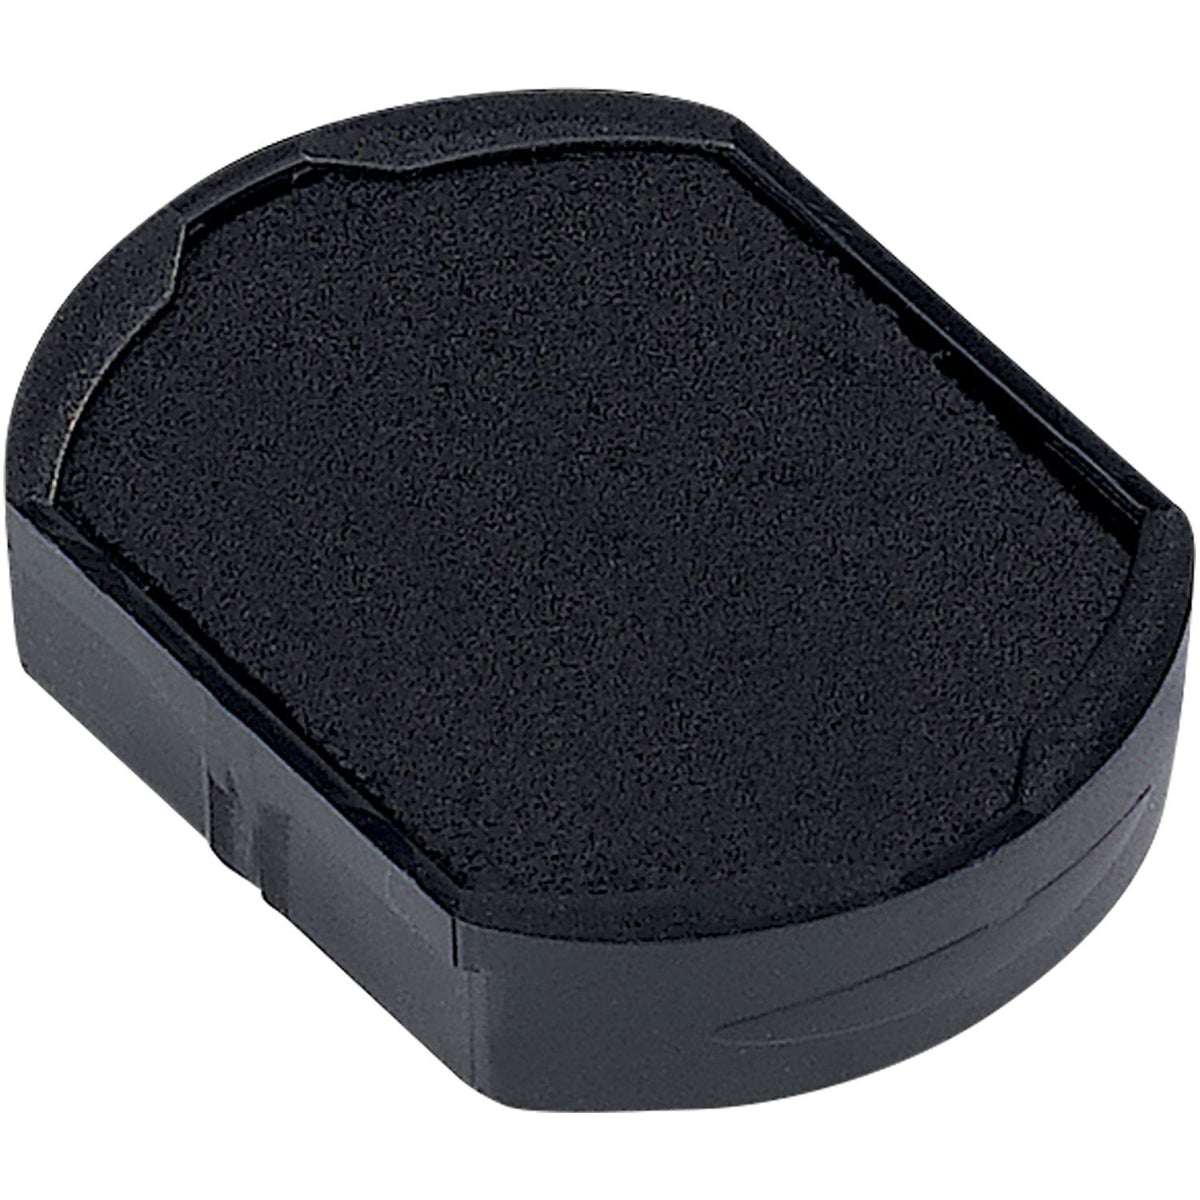 One Color Replacement Ink Pad For 46125-46025 Trodat Black